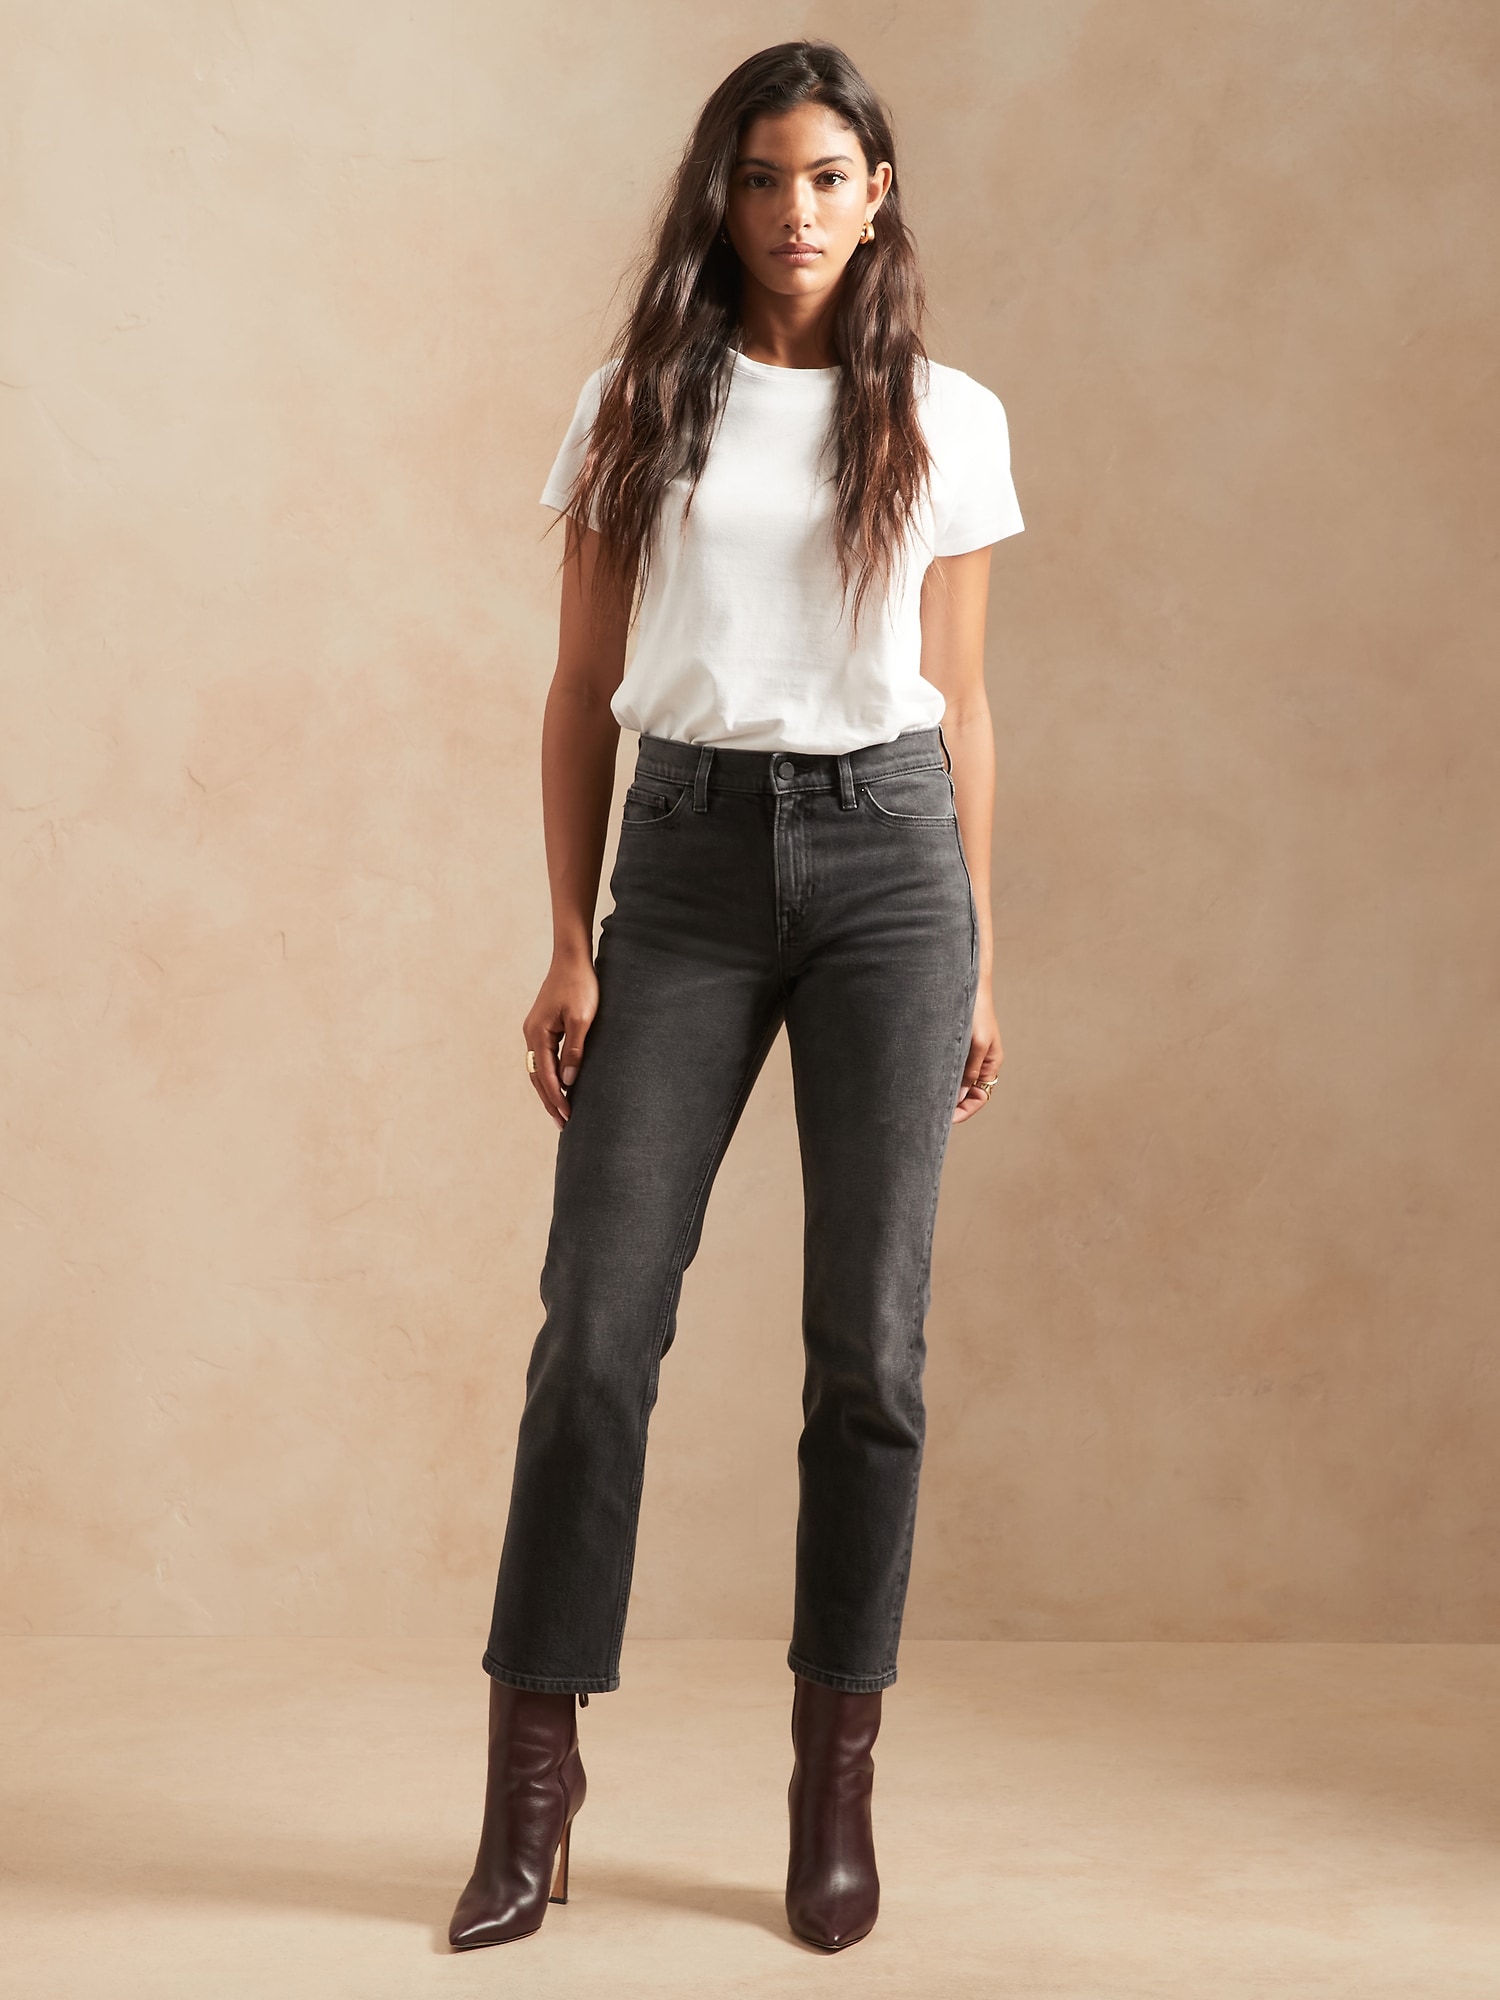 The Crop-Boot Jean